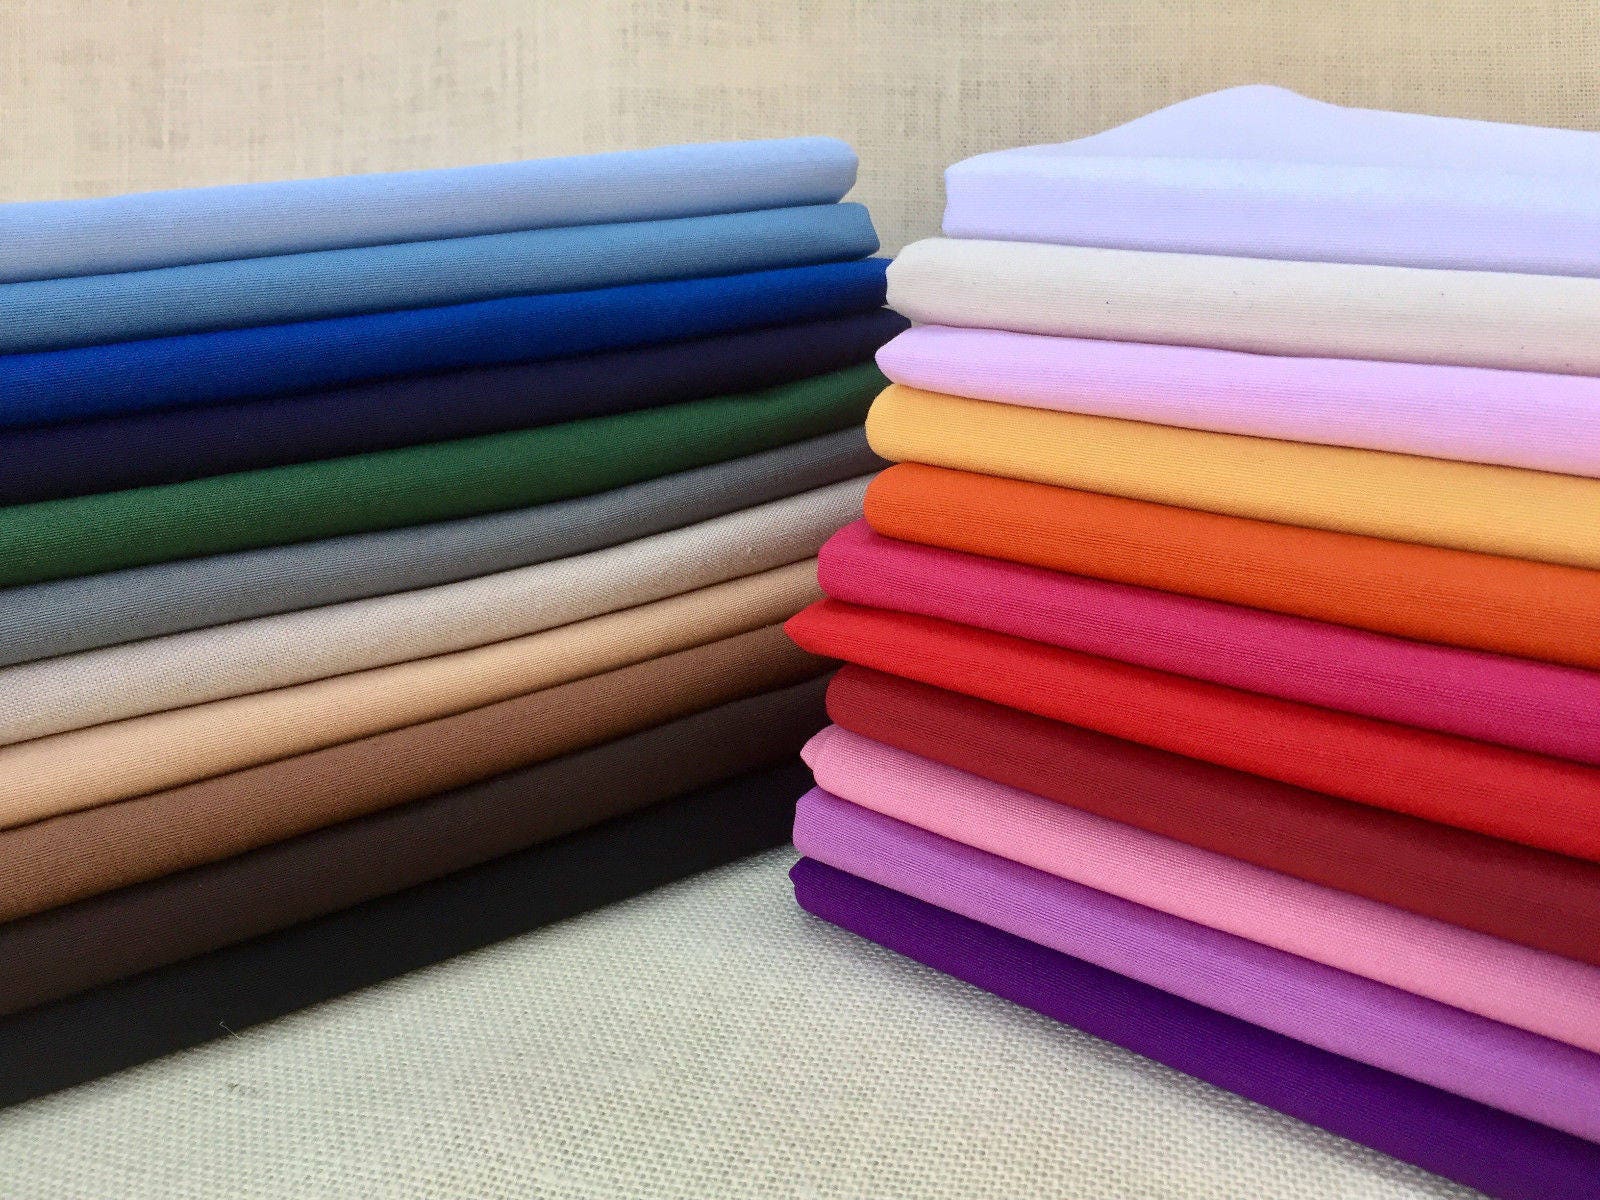 RED Felt Fabric Material Craft Plain Colours Polyester -102cm wide - Lush  Fabric